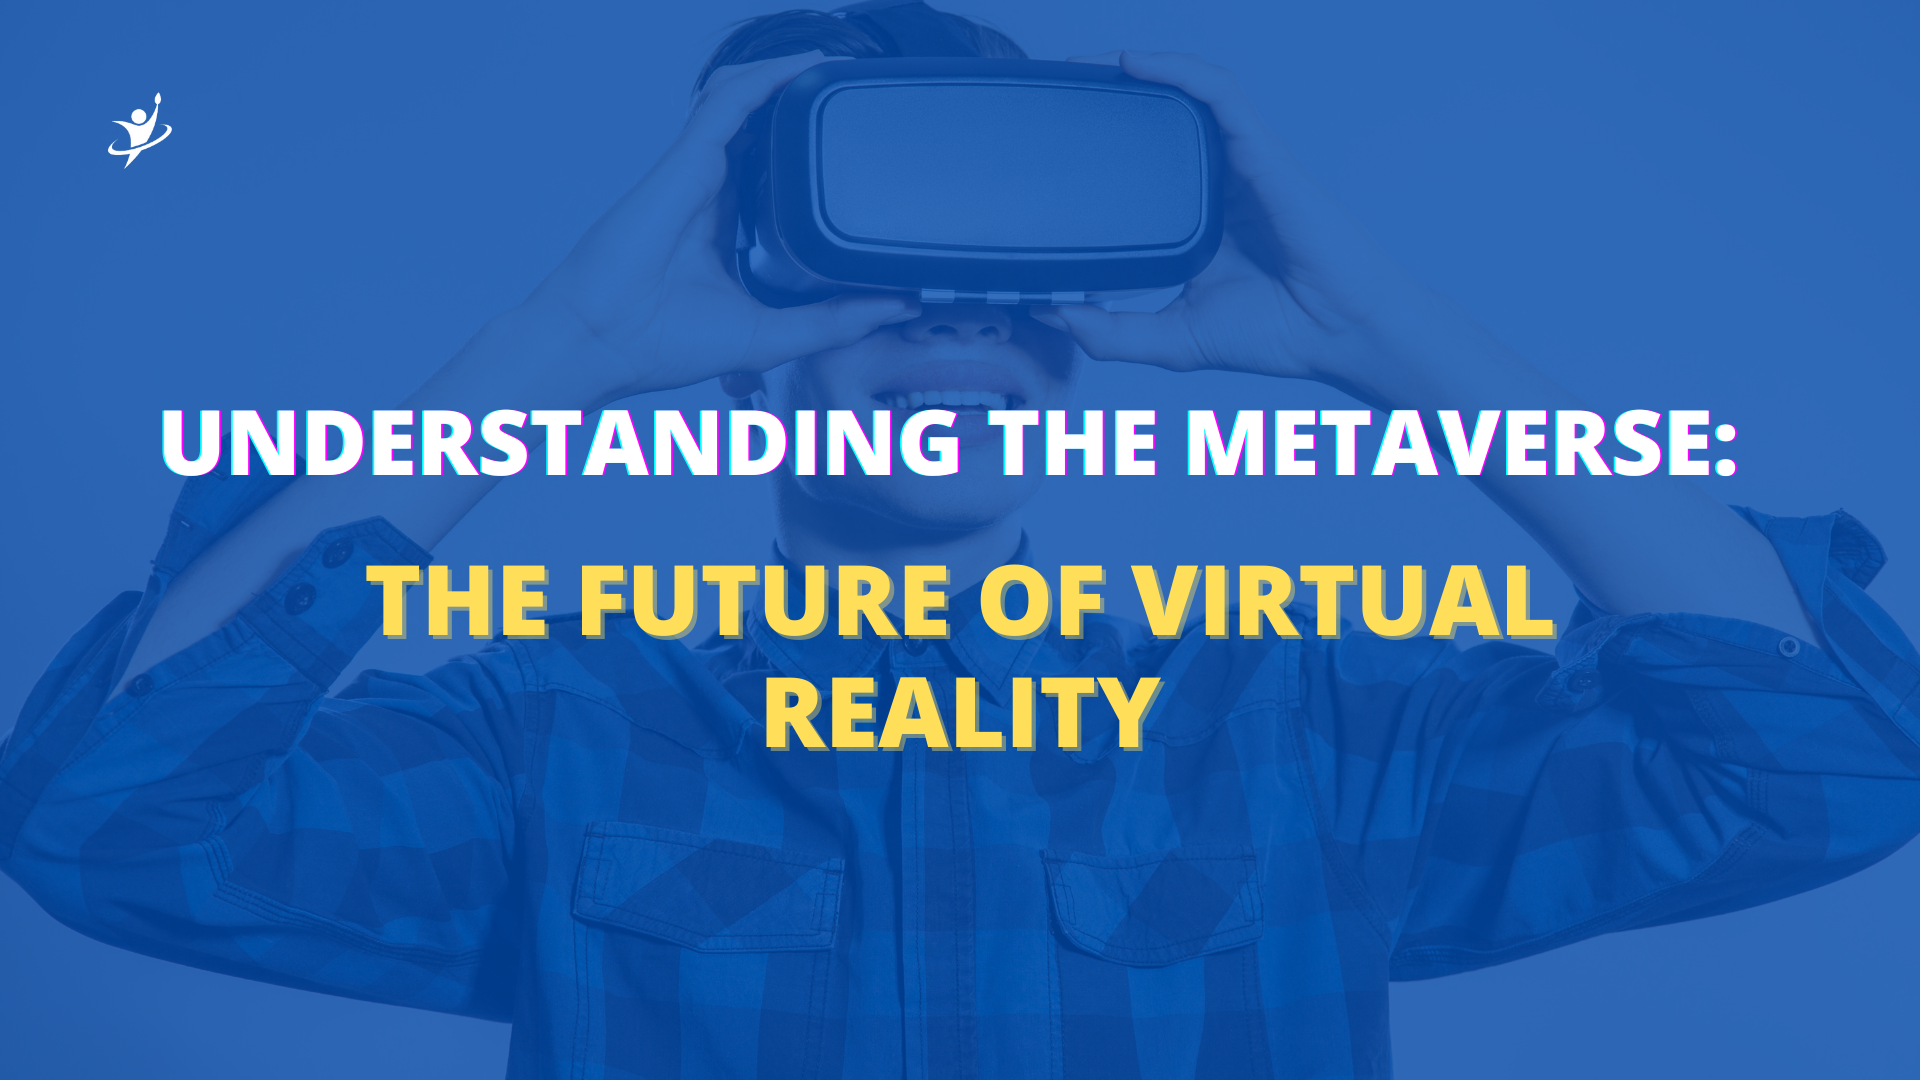 Understanding the Metaverse: The Future of Virtual Reality